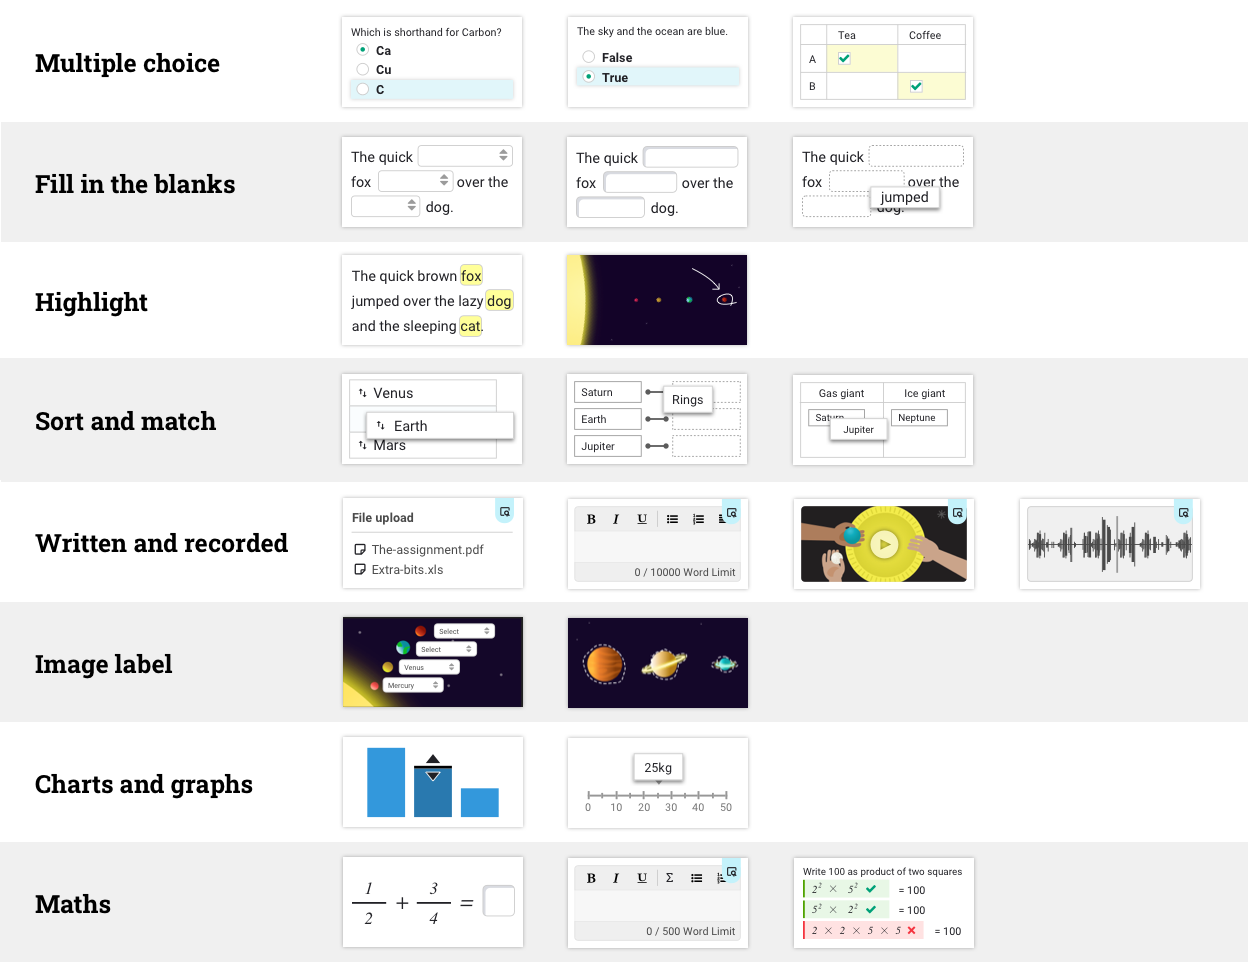 There are eight categories of tasks currently available, offering over 20 uniquThe categories of the different task types: Multiple choice, Fill in the blanks, Highlight, Written and recorded, Sort and match, Image label, Charts and graphs, Maths